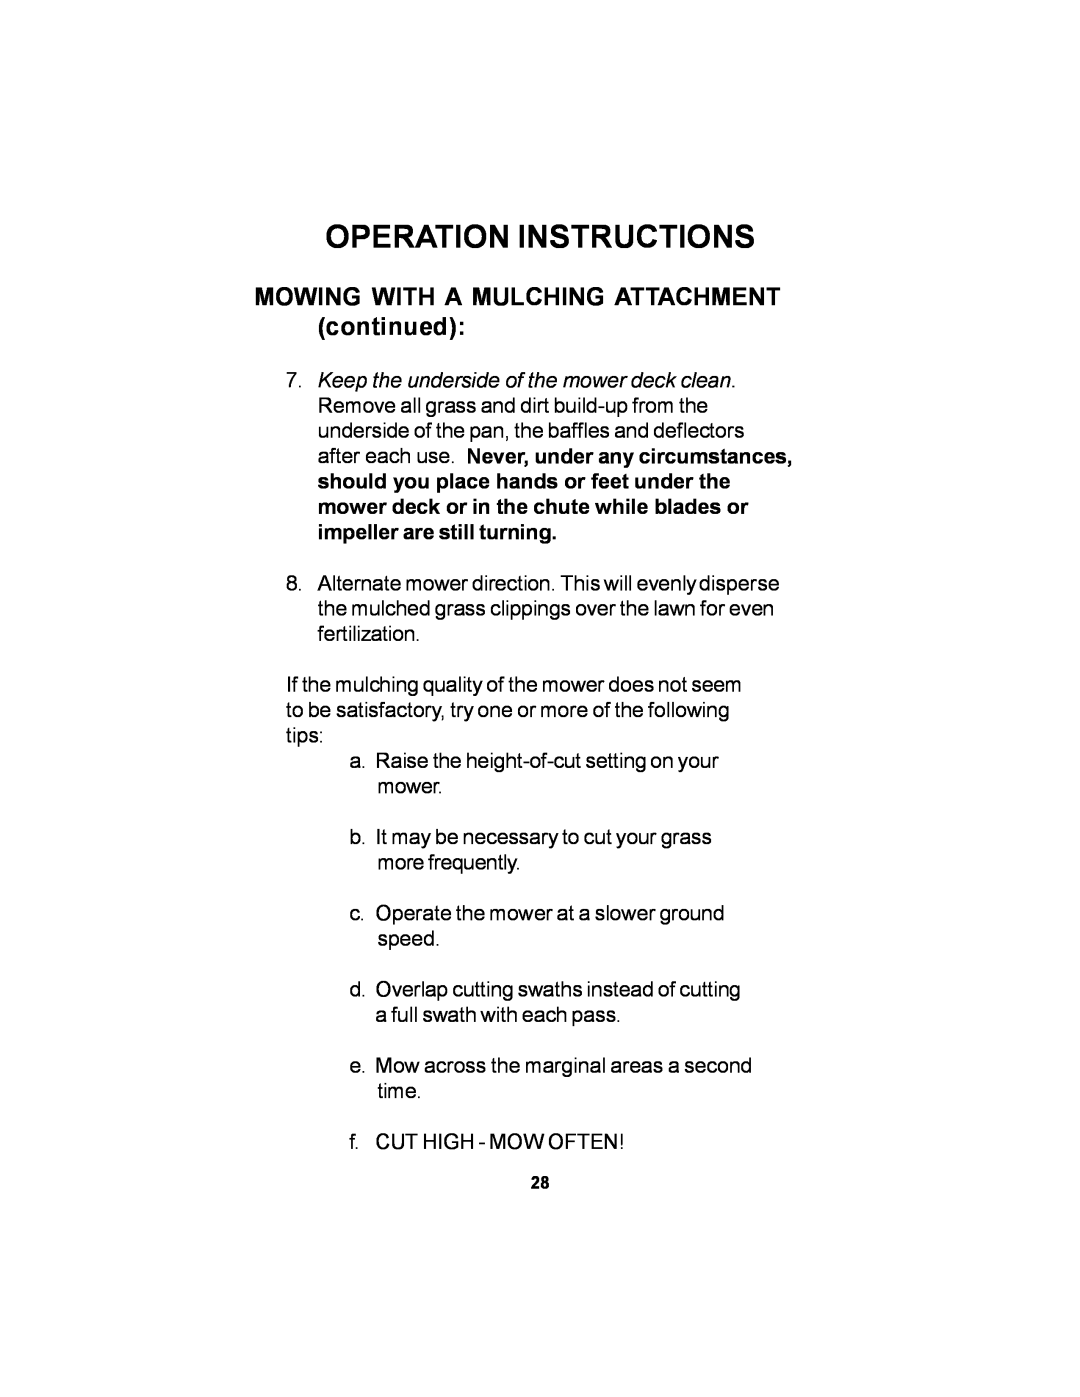 Dixon Black Bear manual MOWING WITH A MULCHING ATTACHMENT continued, Operation Instructions 